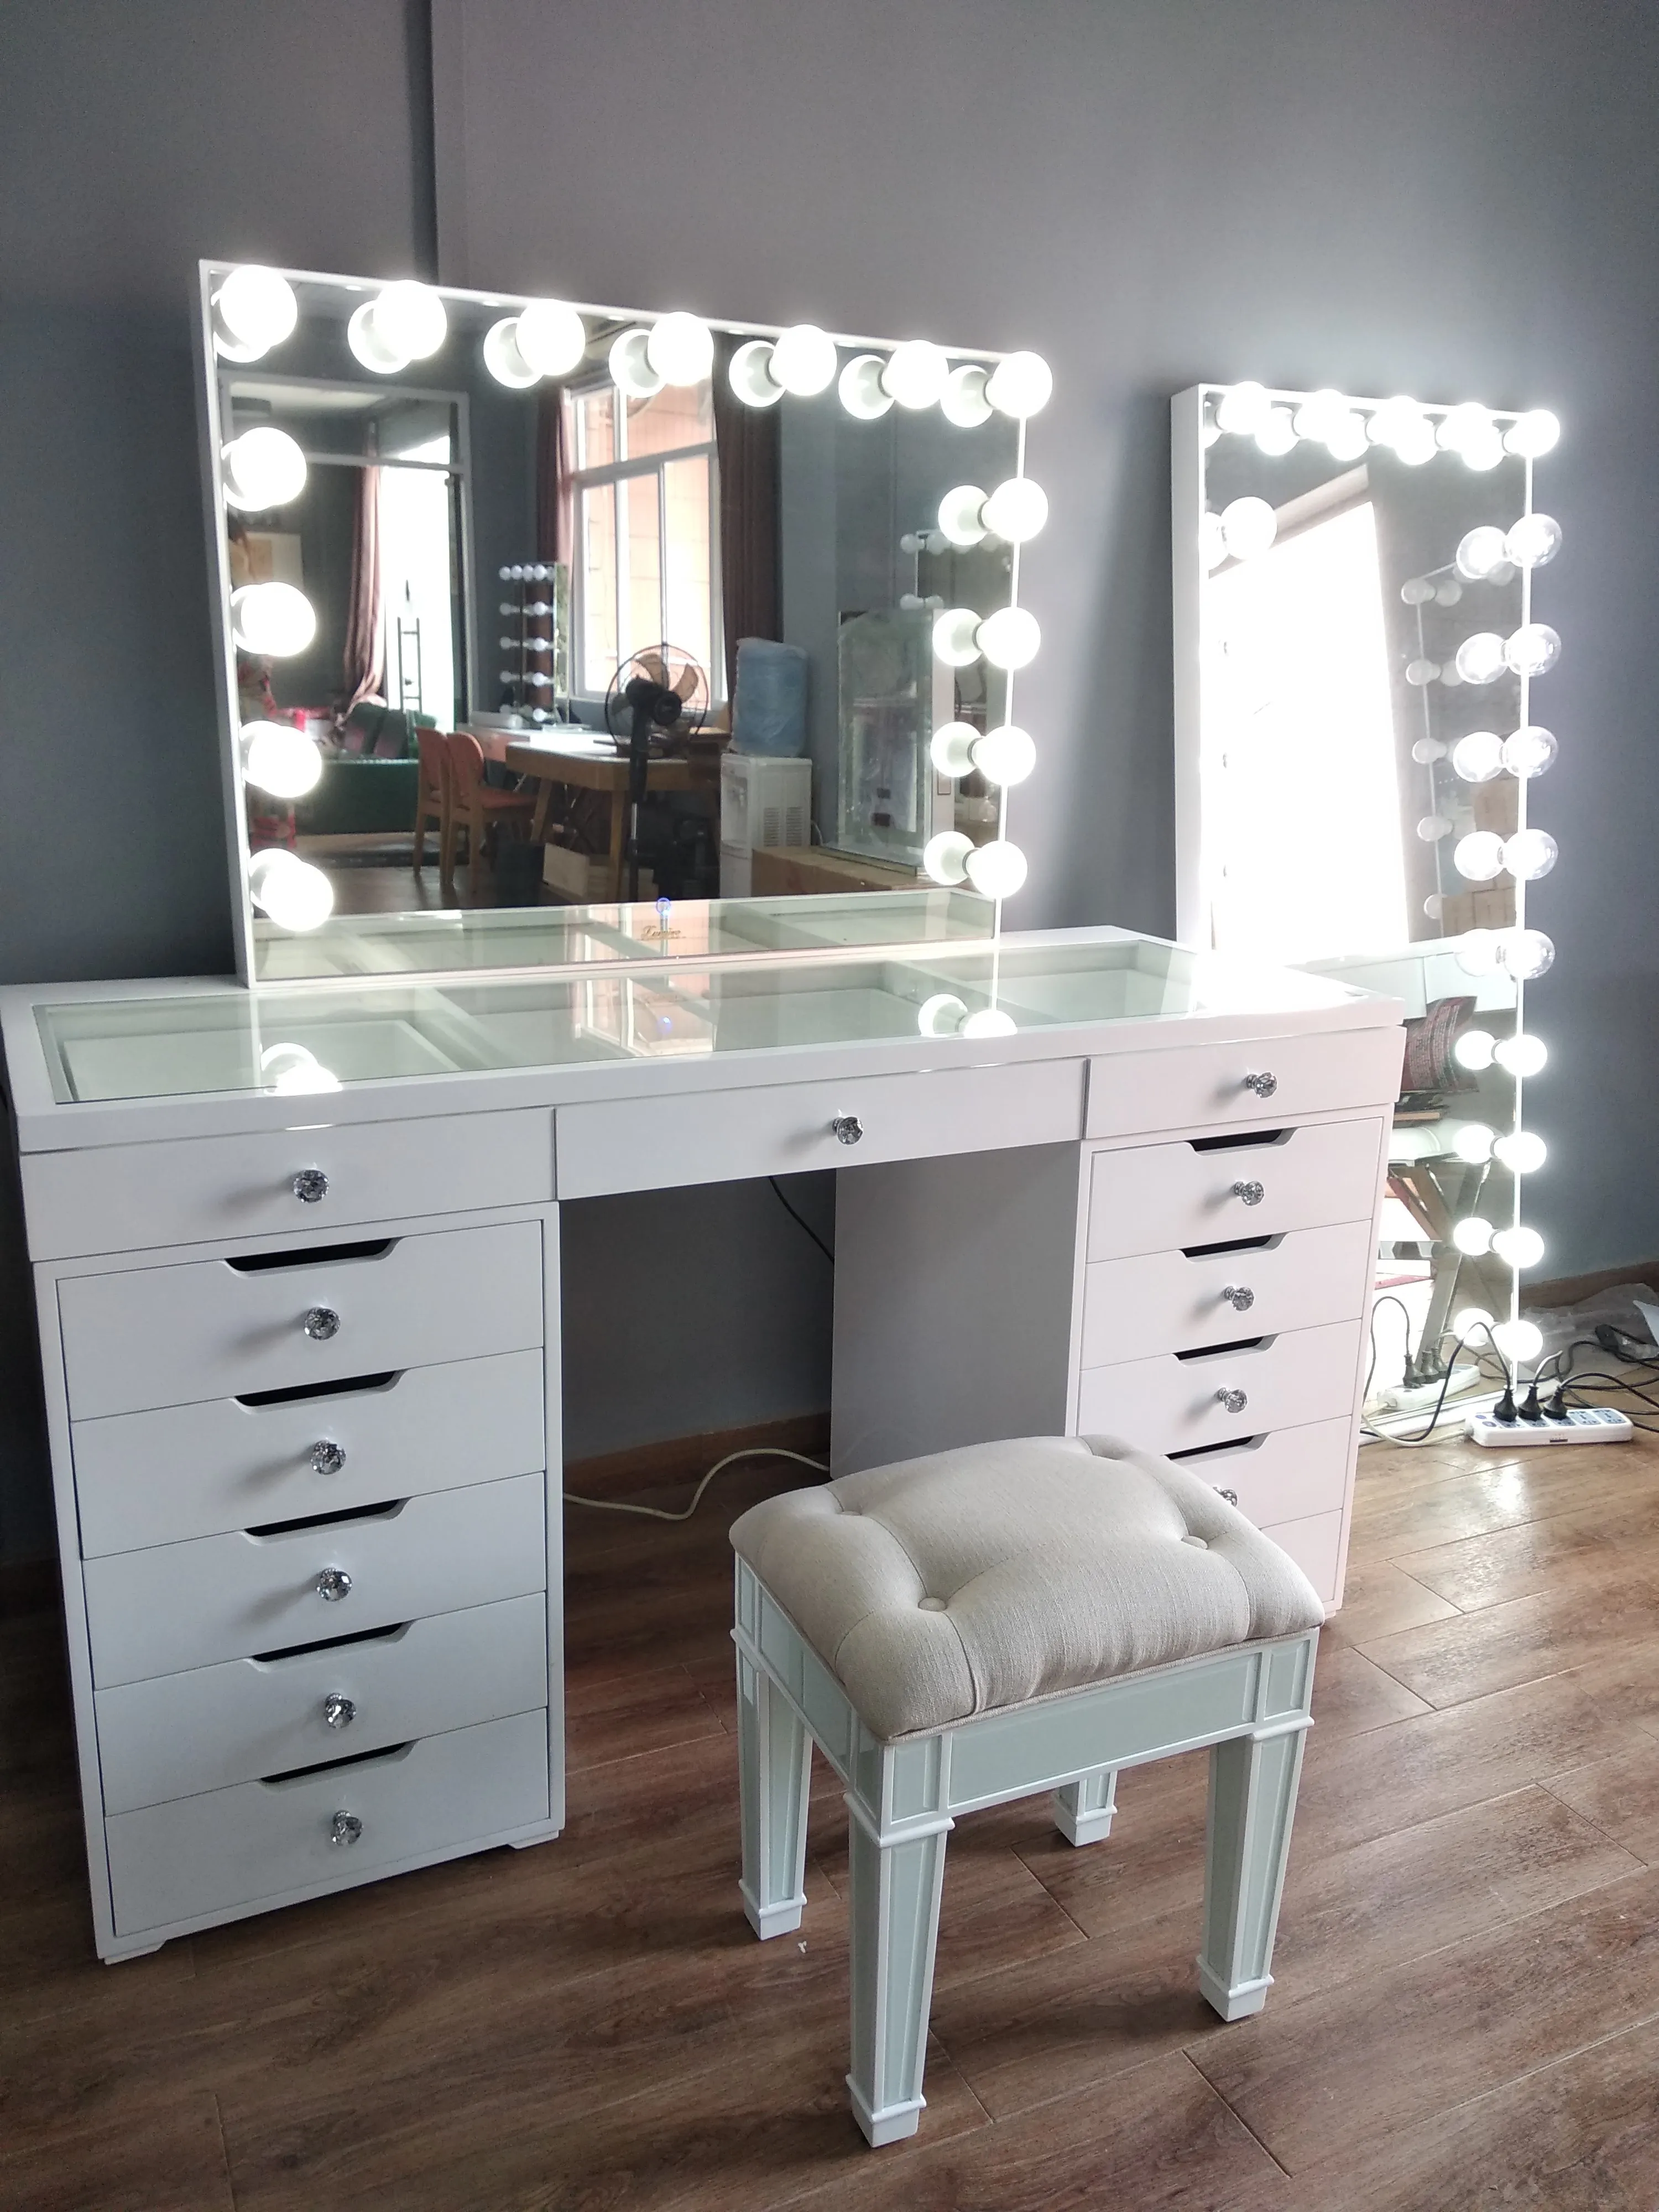 14 Leds Wood Makeup Vanity Table With Mirror Set Dressing Table With Mirror And Draws Makeup Table Vanity Set With Mirror Buy Vanity Makeup Table With Mirror Dressing Table With Mirror And